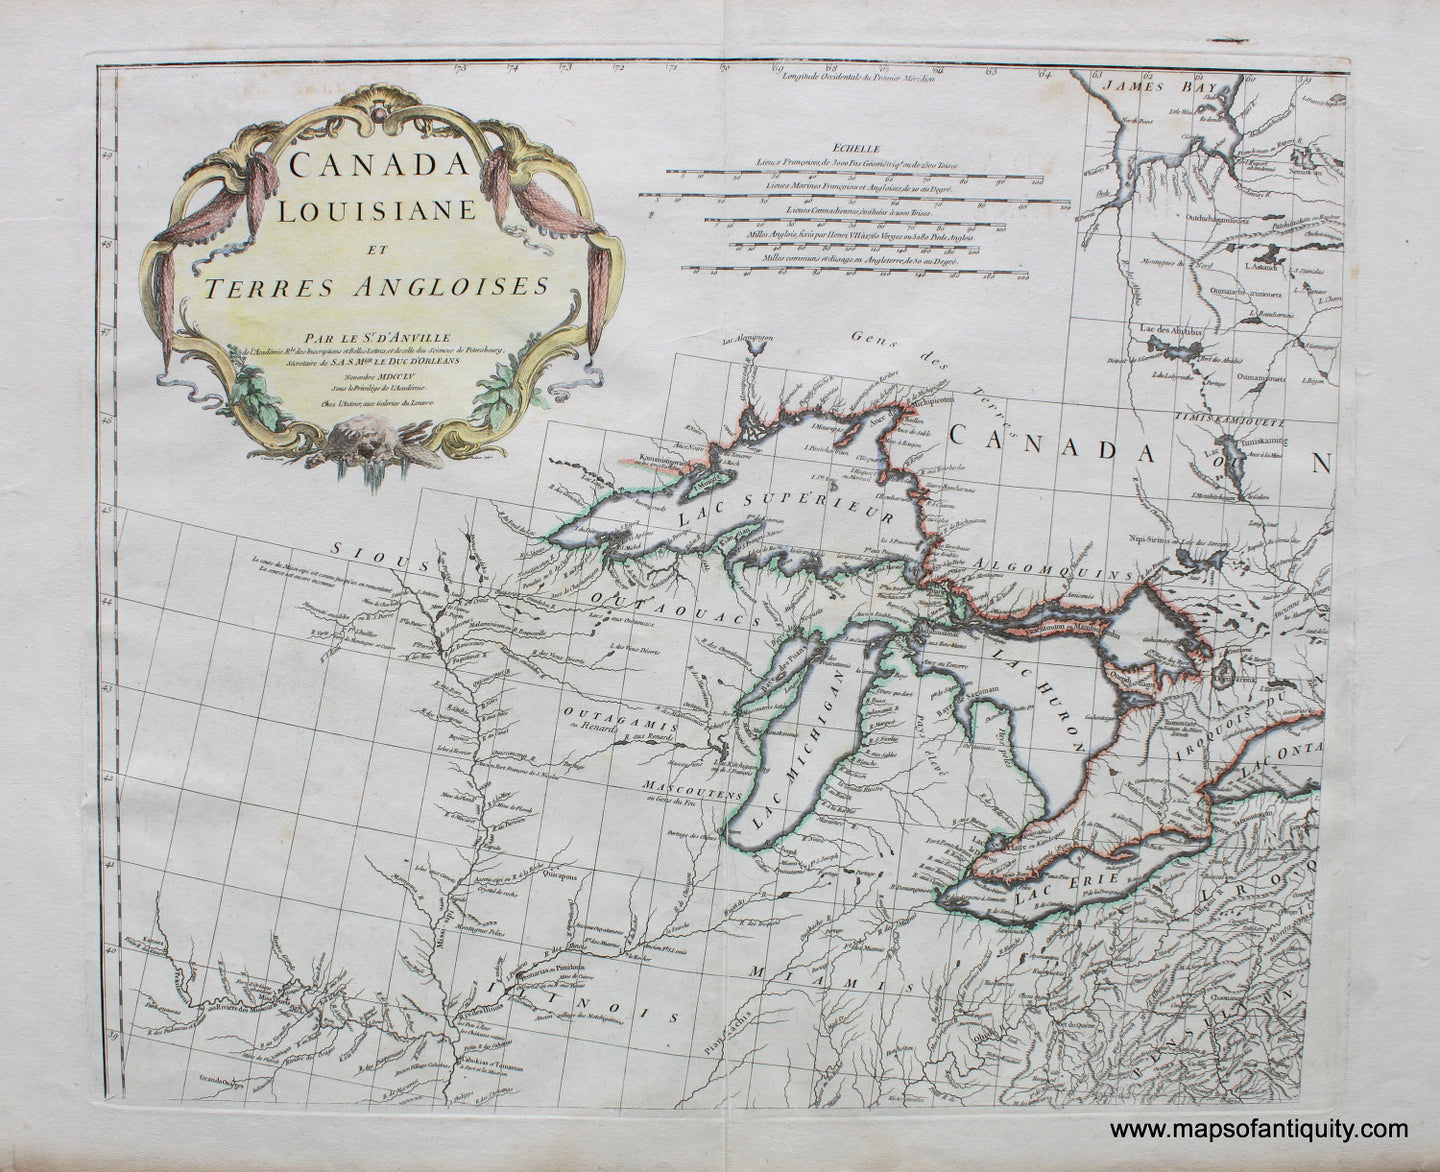 Set-of-2-Antique-Hand-Colored-Maps-Canada-Louisiane-et-Terres-Angloises-Canada--1755-D'Anville-Maps-Of-Antiquity